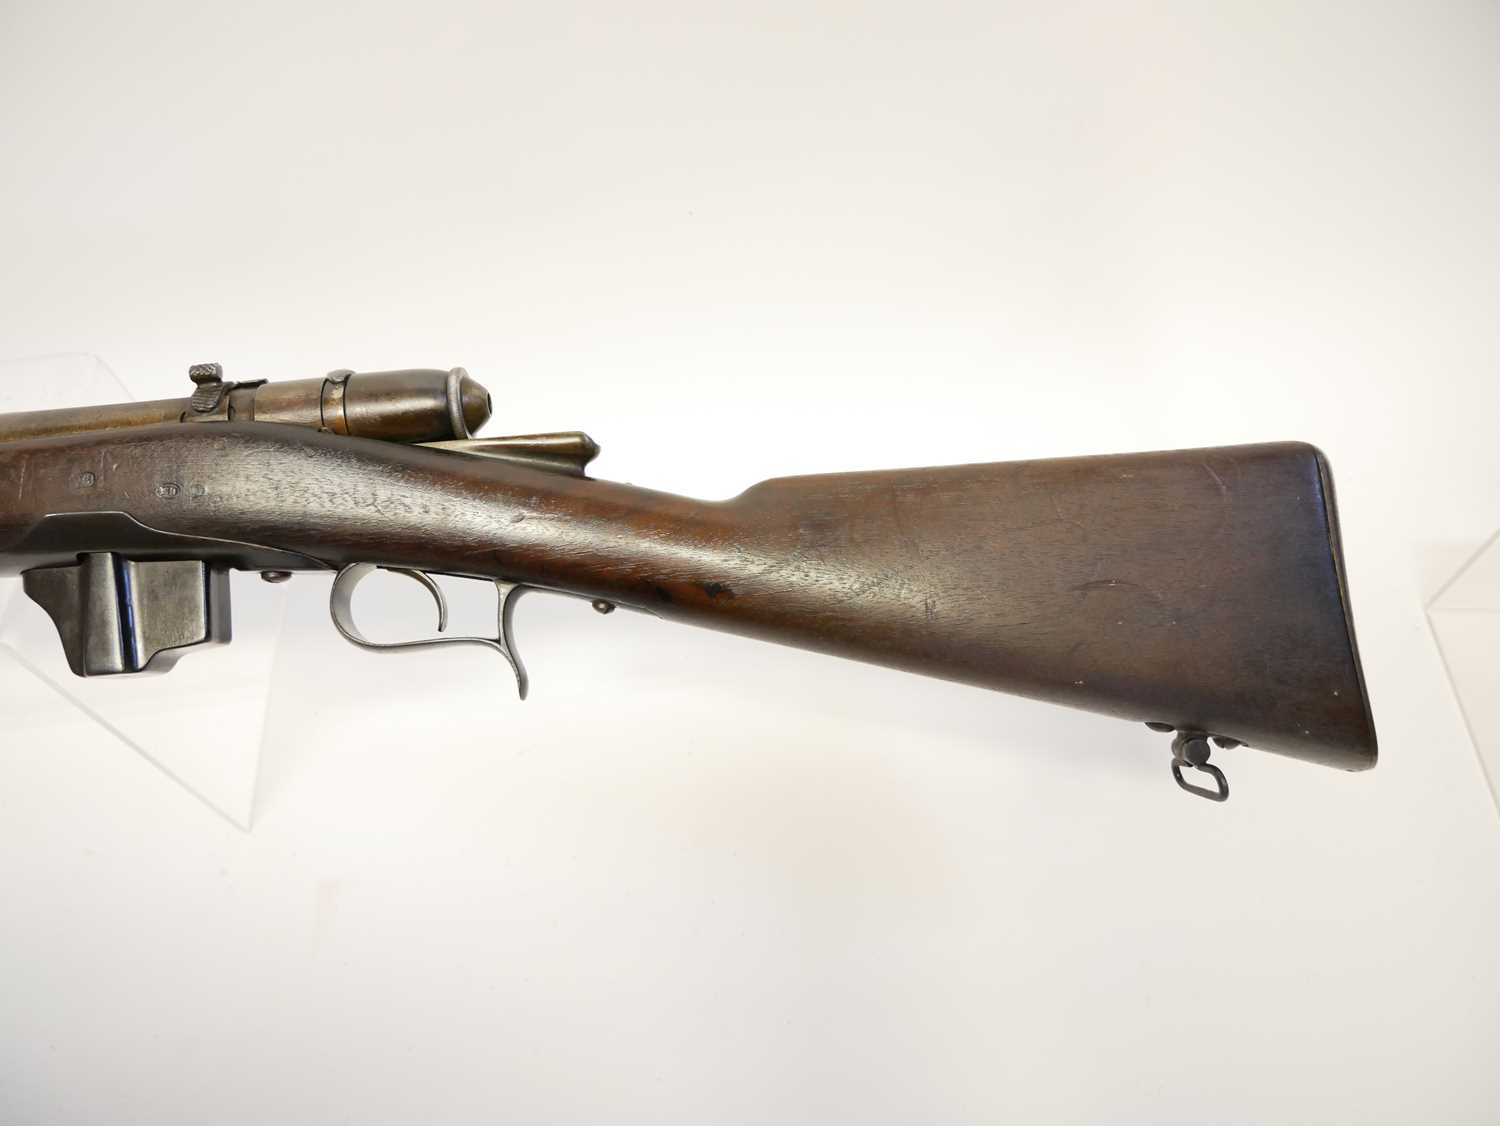 Italian Vetterli M.1870/87 10.35x47R bolt action rifle, serial number 5778, 33.5inch barrel fitted - Image 12 of 17